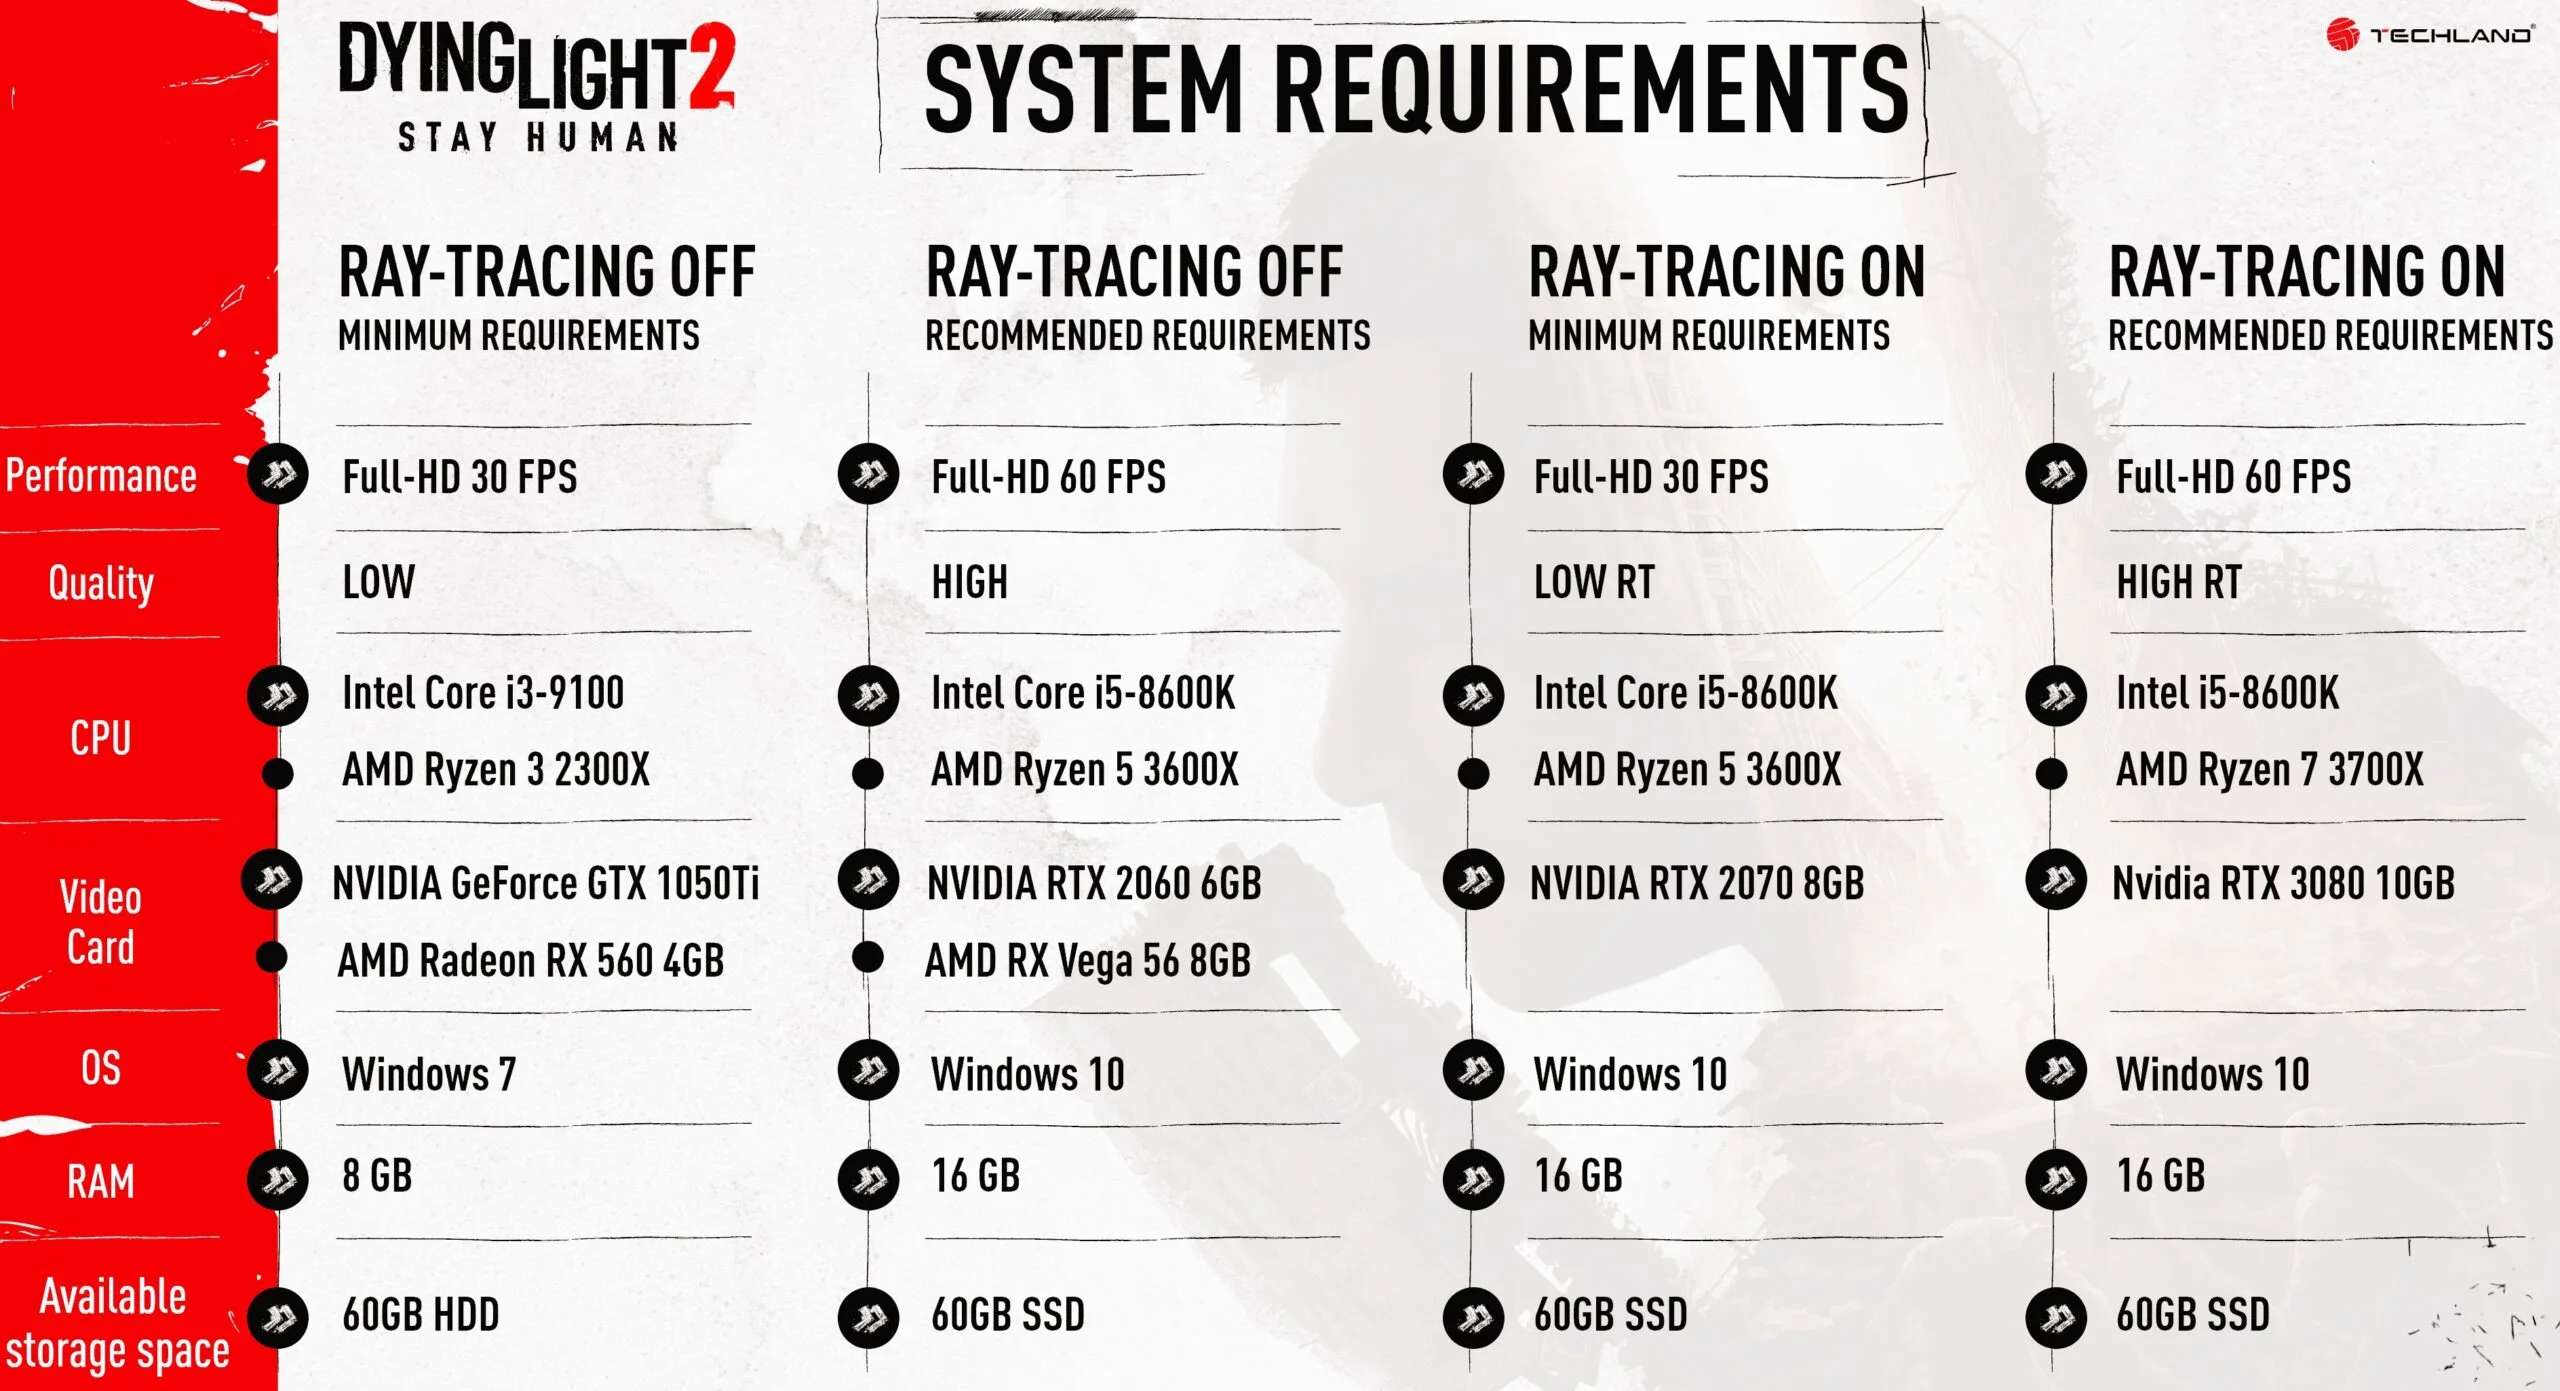 System Requirements for Dying Light 2